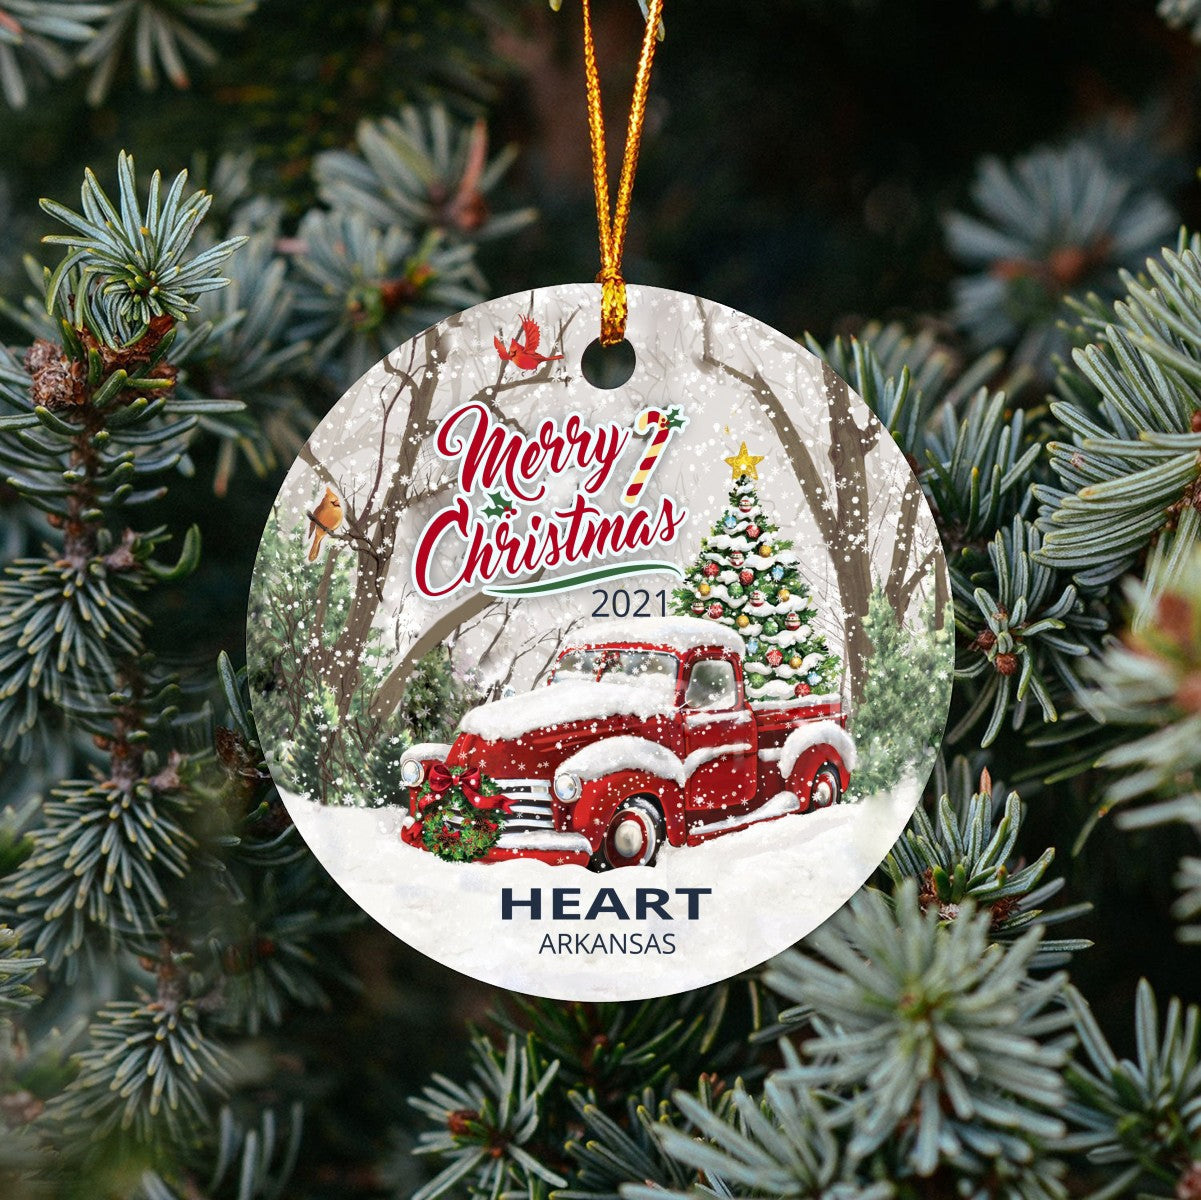 Christmas Tree Ornaments Heart - Ornament With Name City, State Heart Arkansas AR Ornament - Red Truck Xmas Ornaments 3'' Plastic Gift For Family, Friend And Housewarming